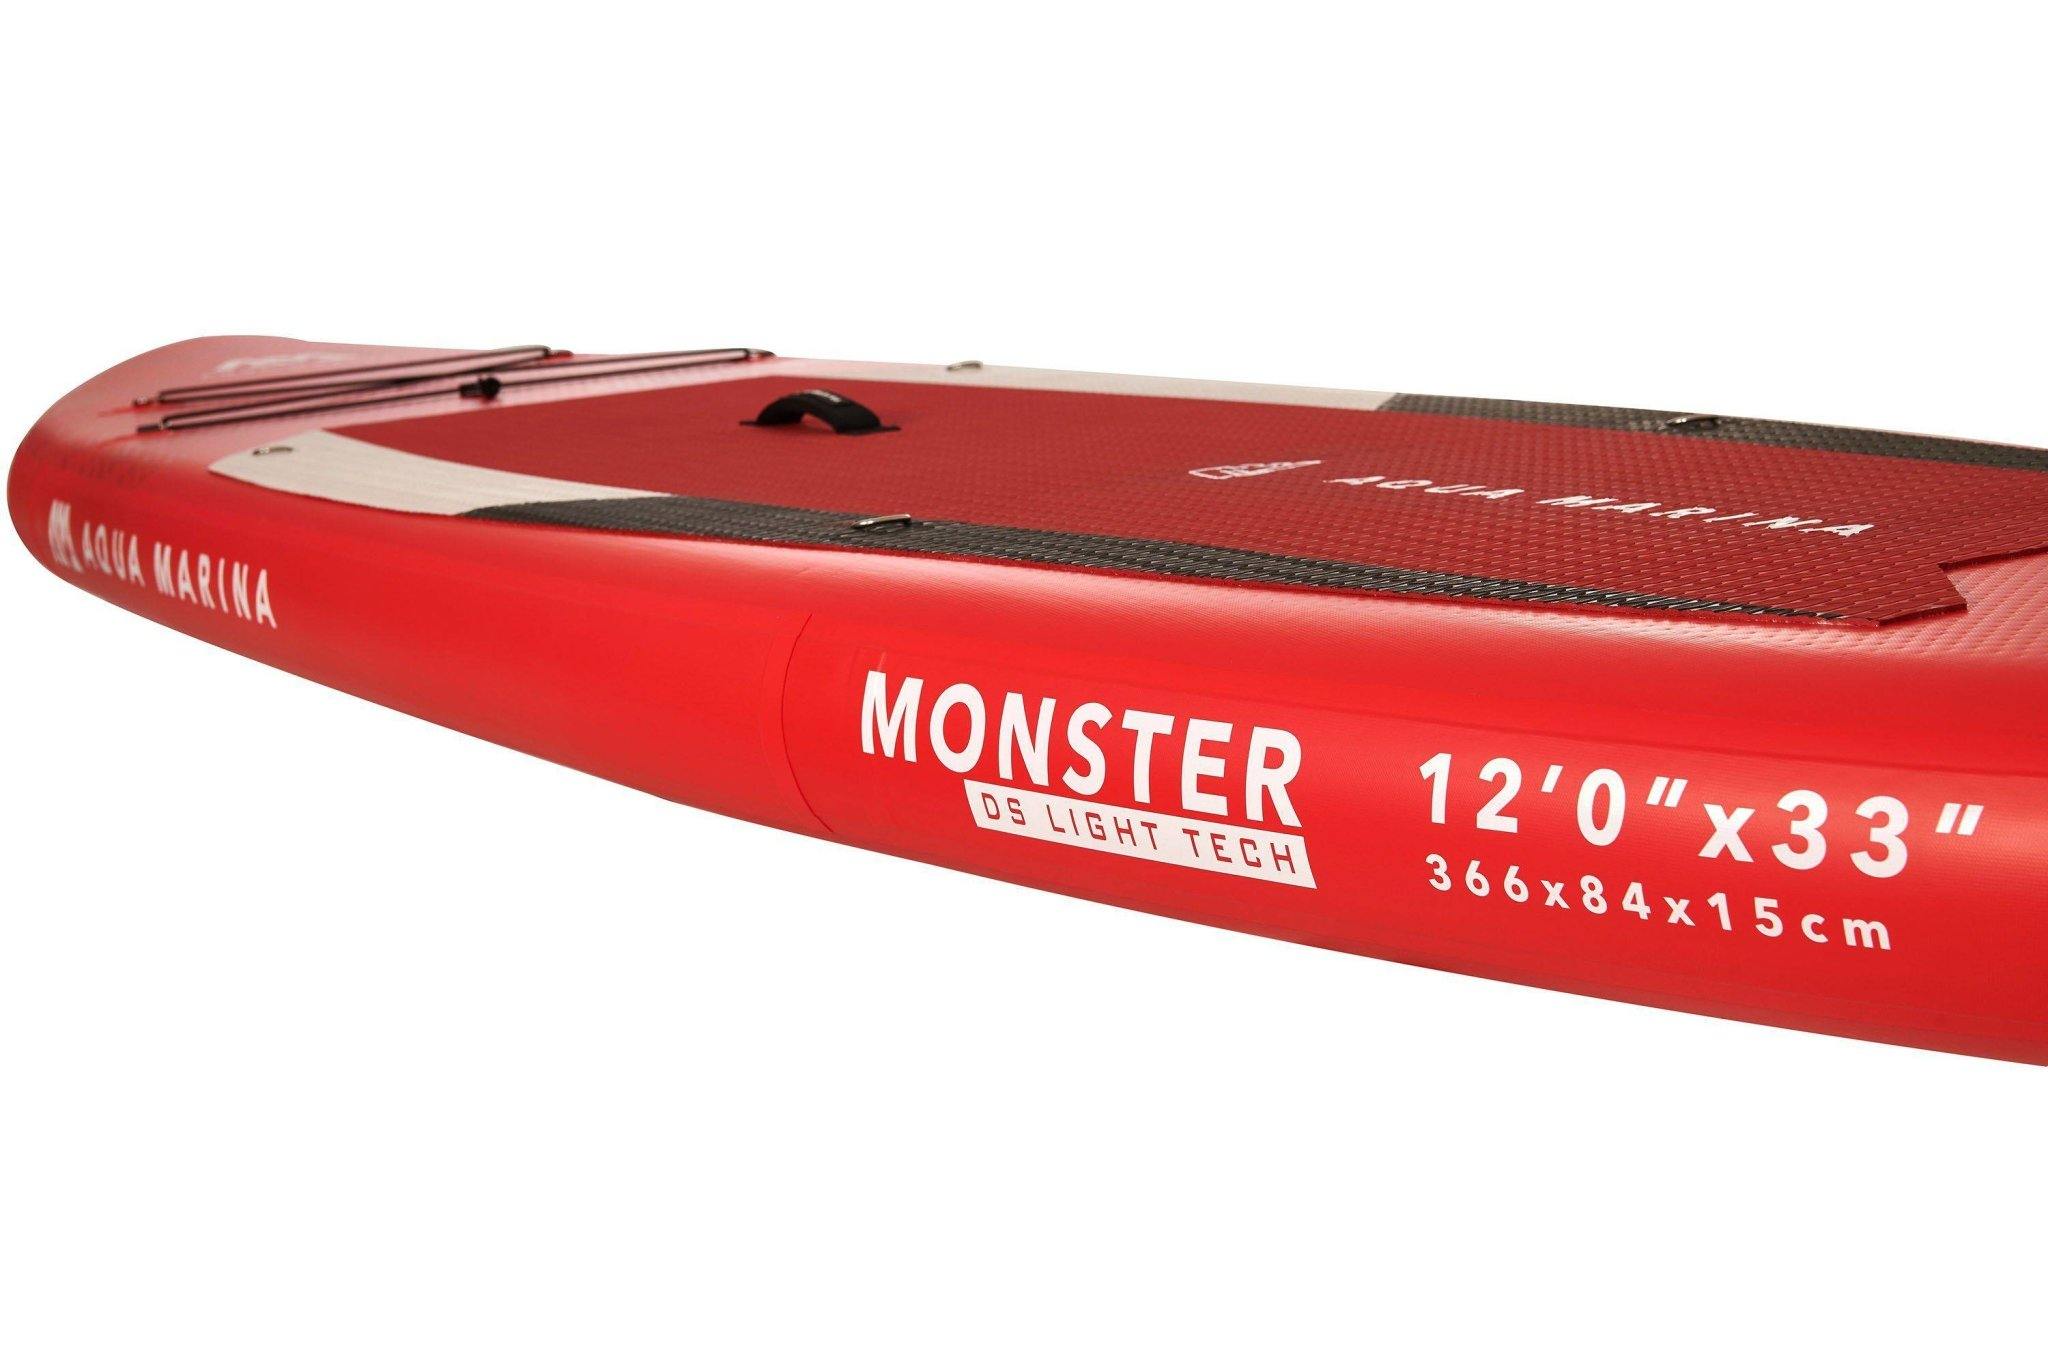 Monster All-Around iSUP Paddle Board - DTI Direct USA